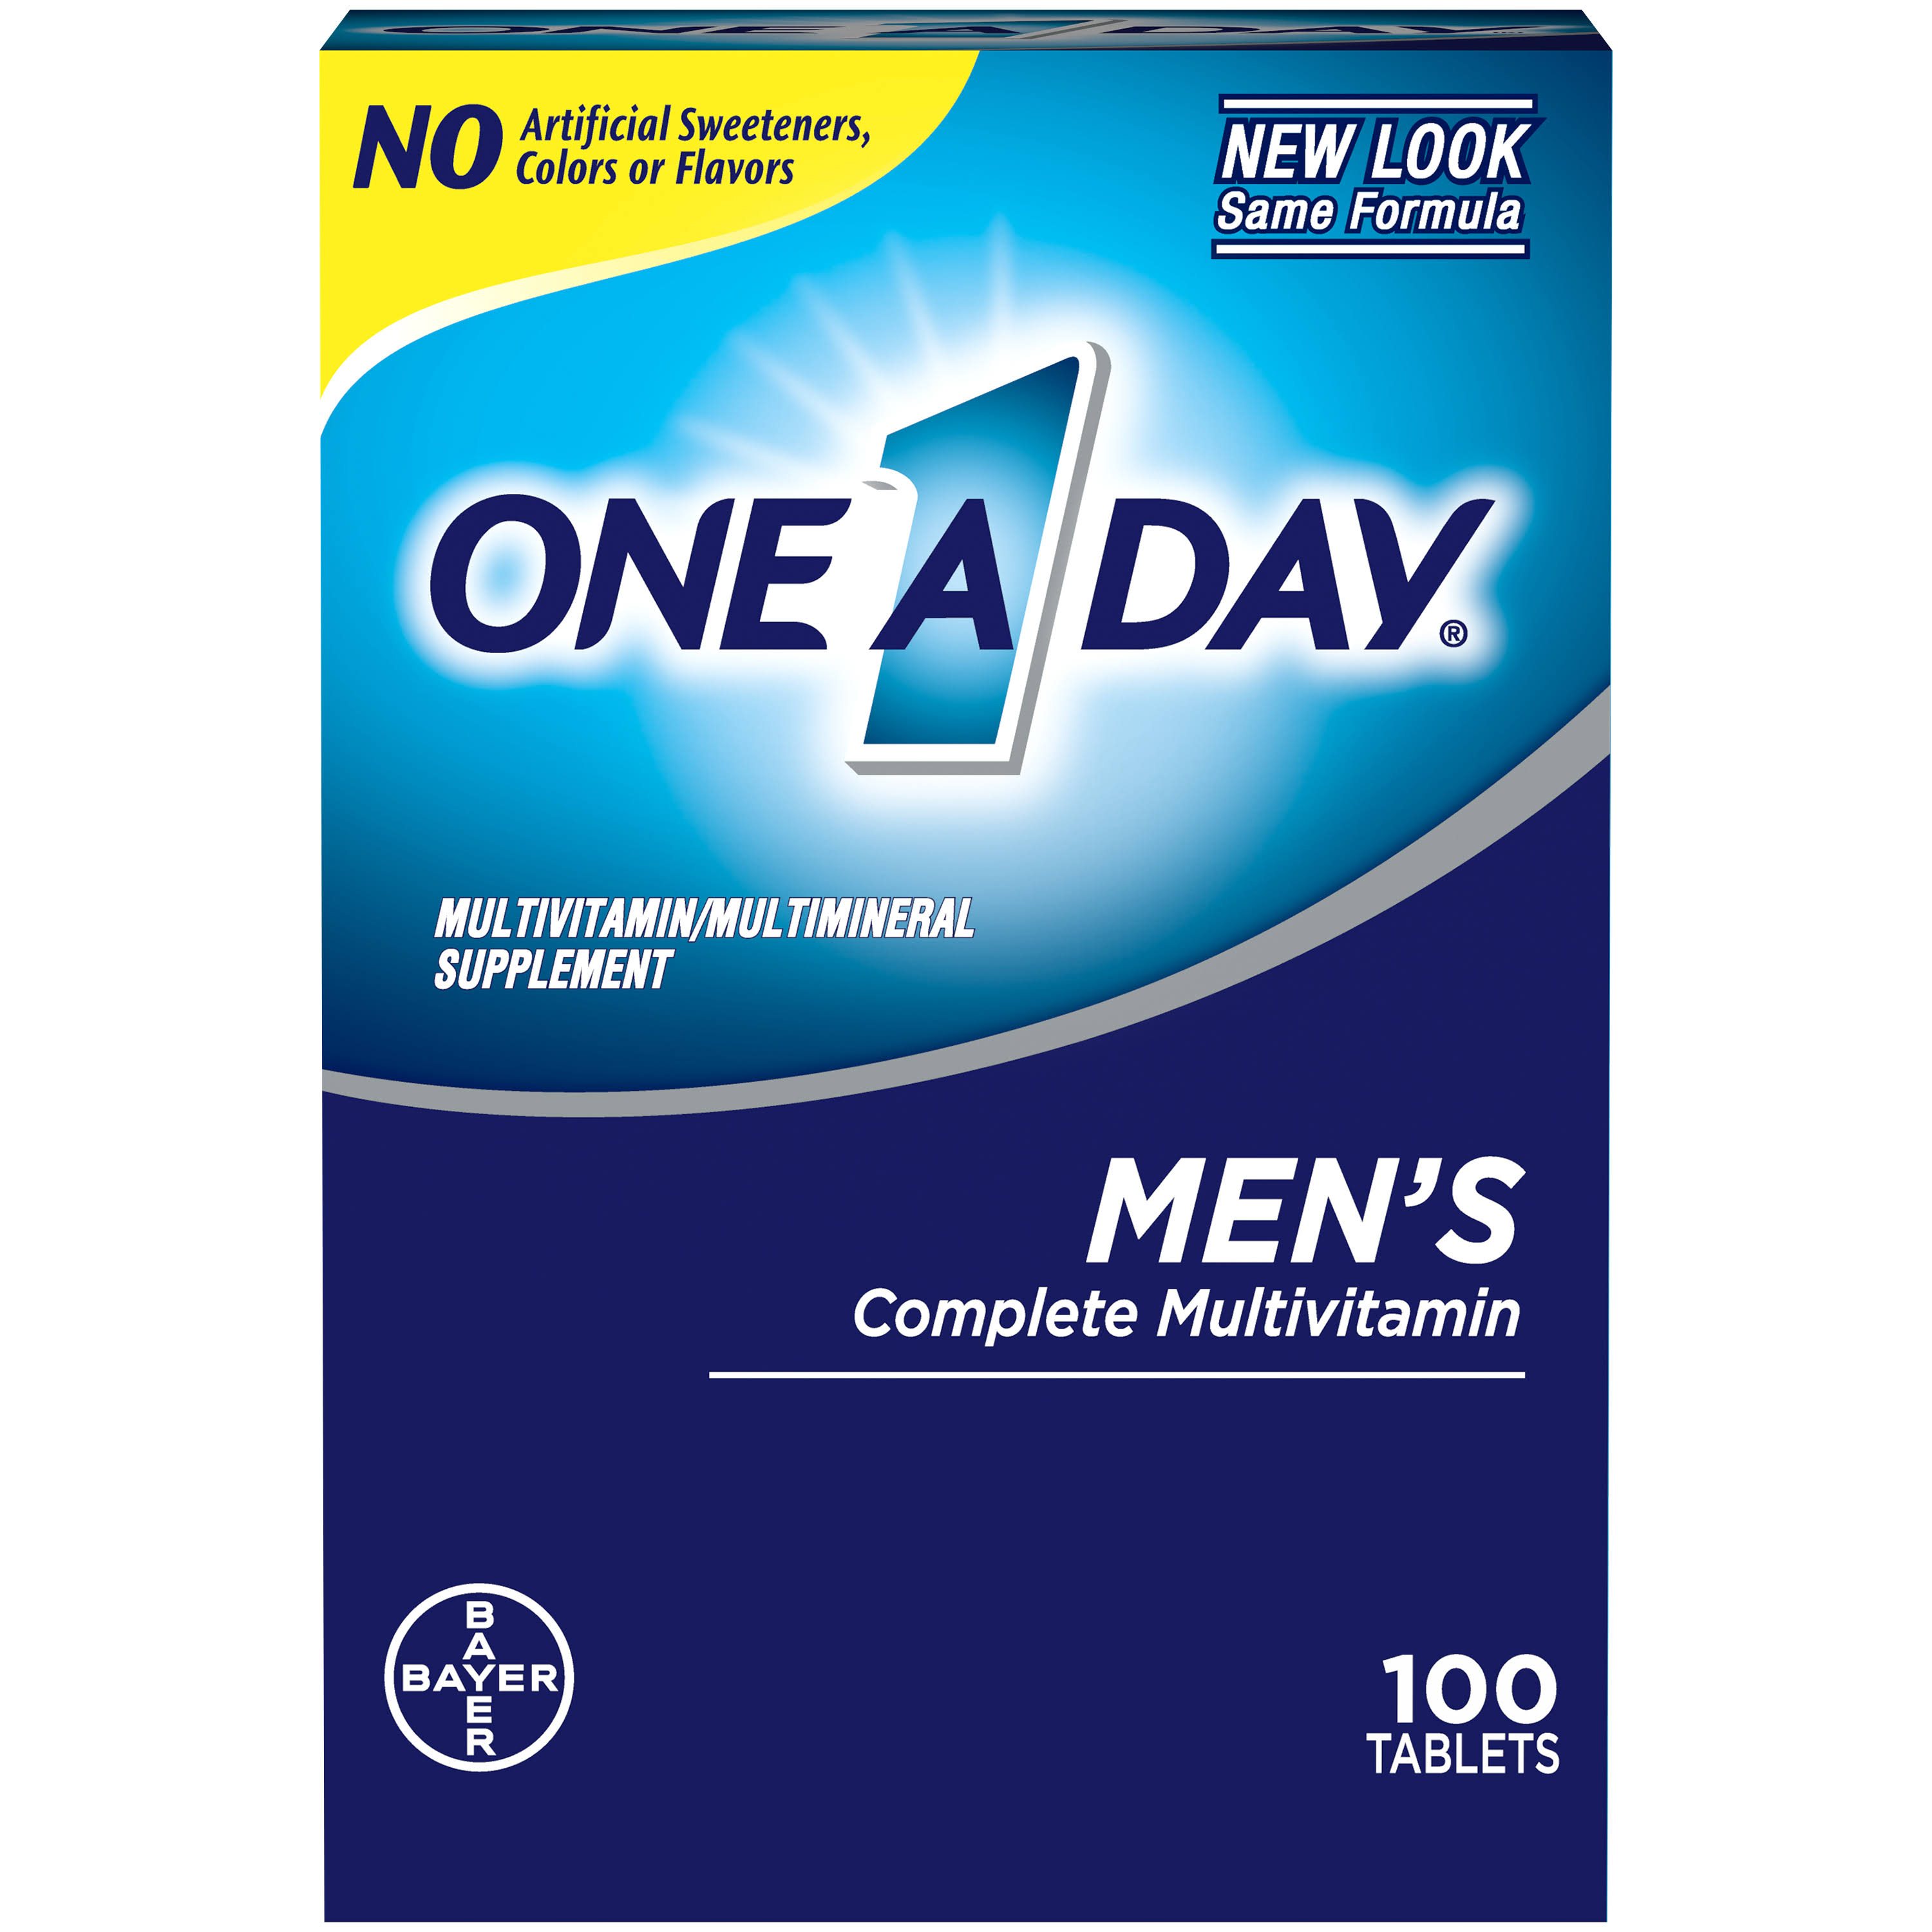 One A Day Complete Multivitamin, Men's, Tablets - 100 tablets